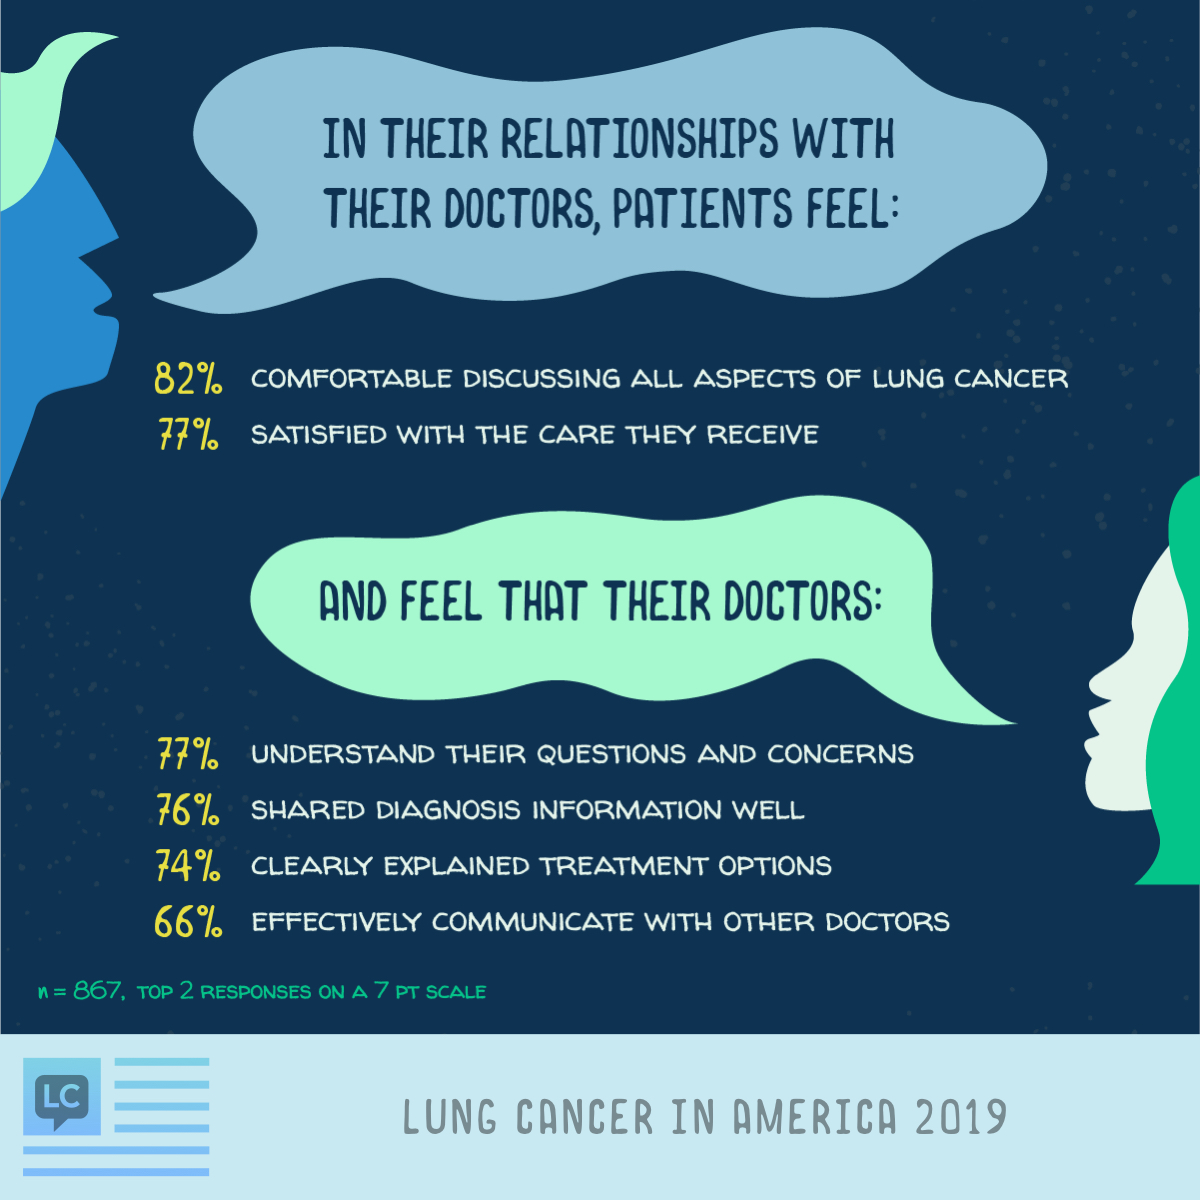 Patients feel comfortable talking about their lung cancer with their doctor (82%) and satisfied with the care they receive (77%). Patients feel their doctors understand their questions (77%), shared any diagnosis information well (76%), explained treatment options (74%), and communicate well with other doctors (66%).